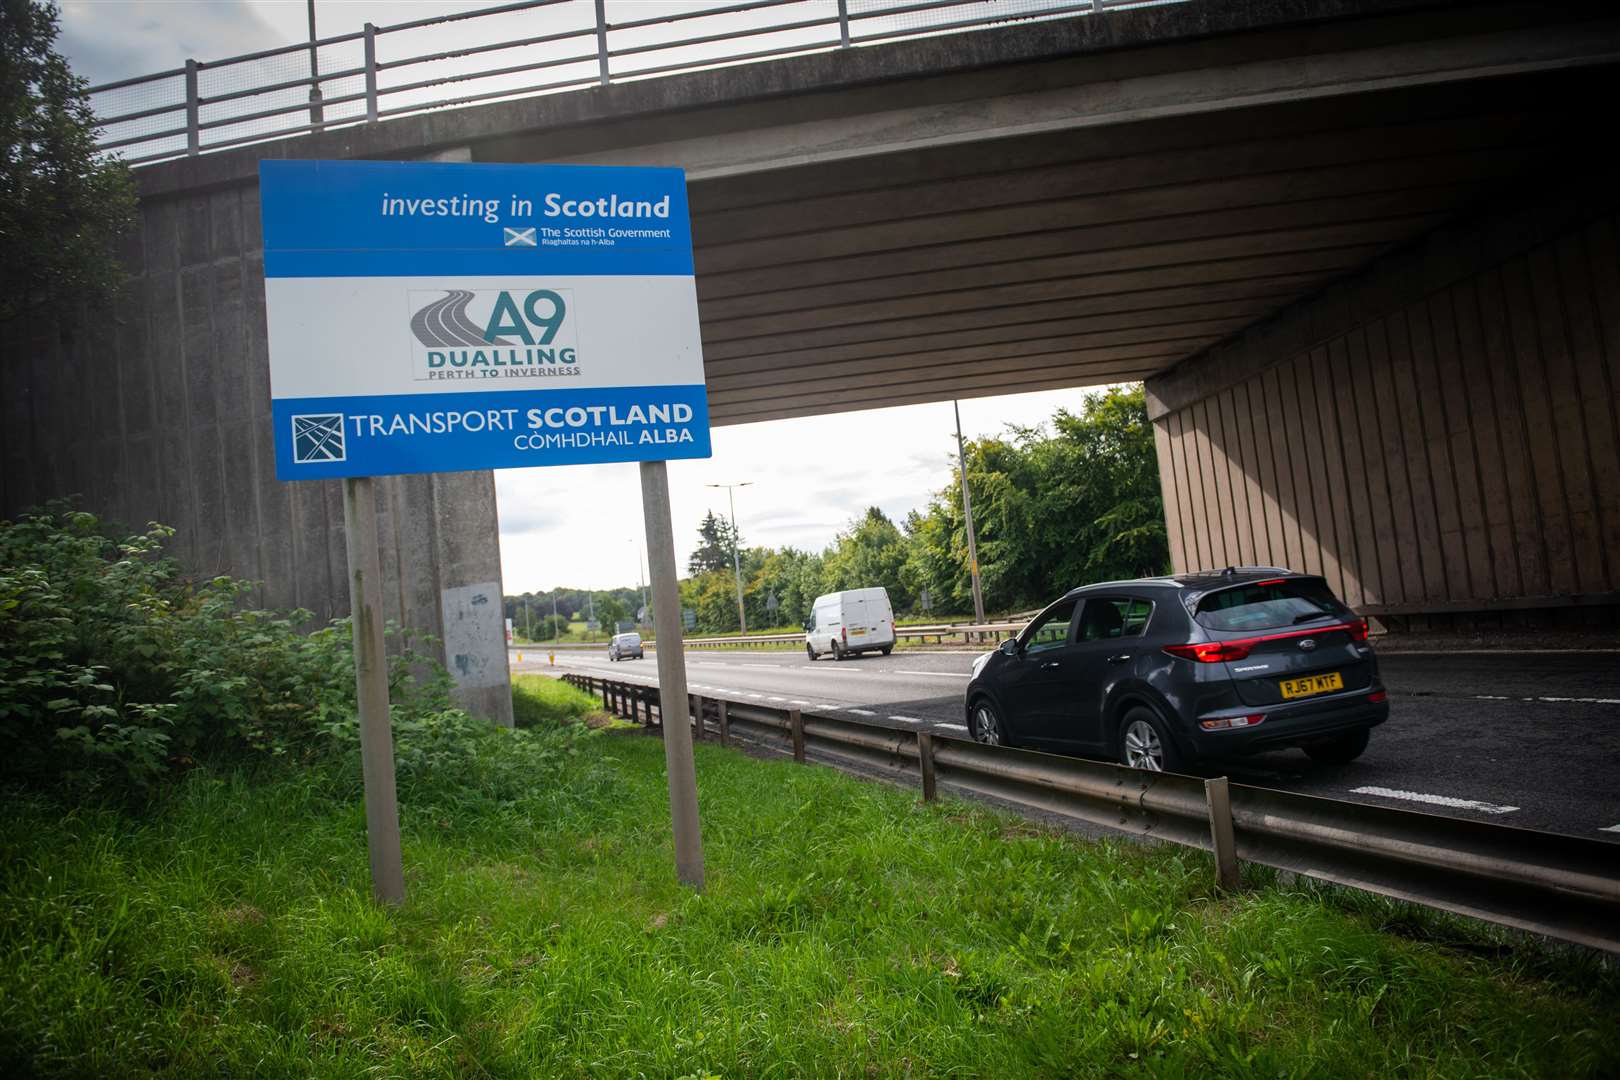 Would A9 dualling really make the road safer?